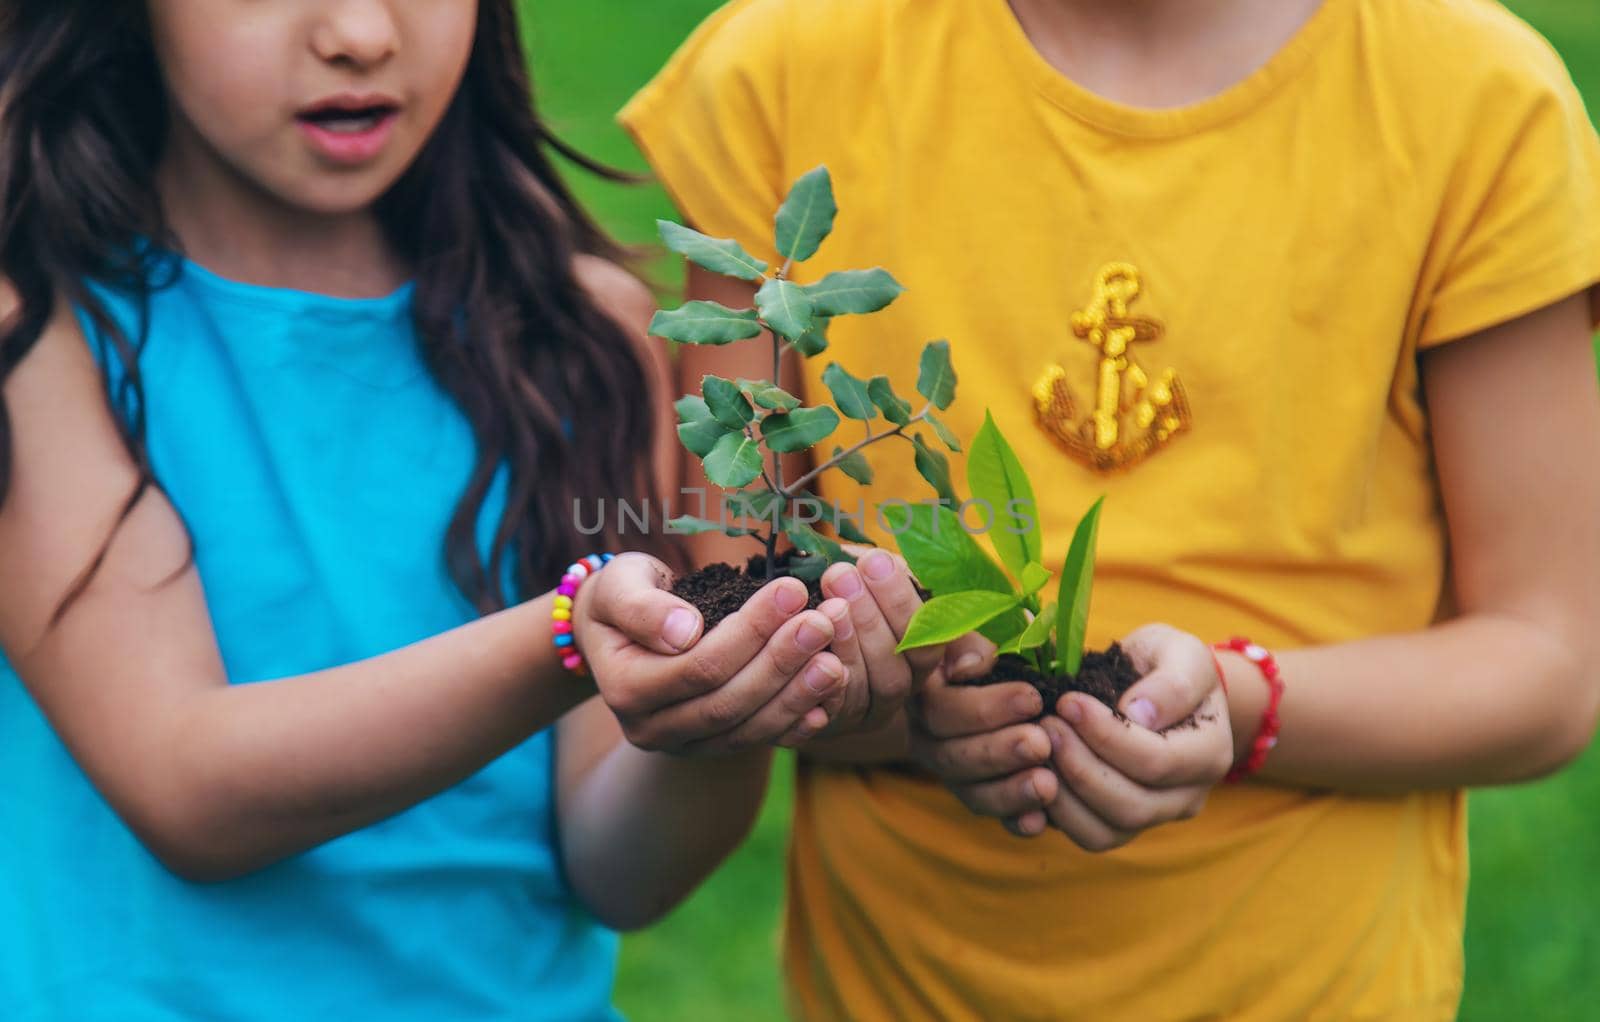 The child holds the plant and soil in his hands. Selective focus. by yanadjana